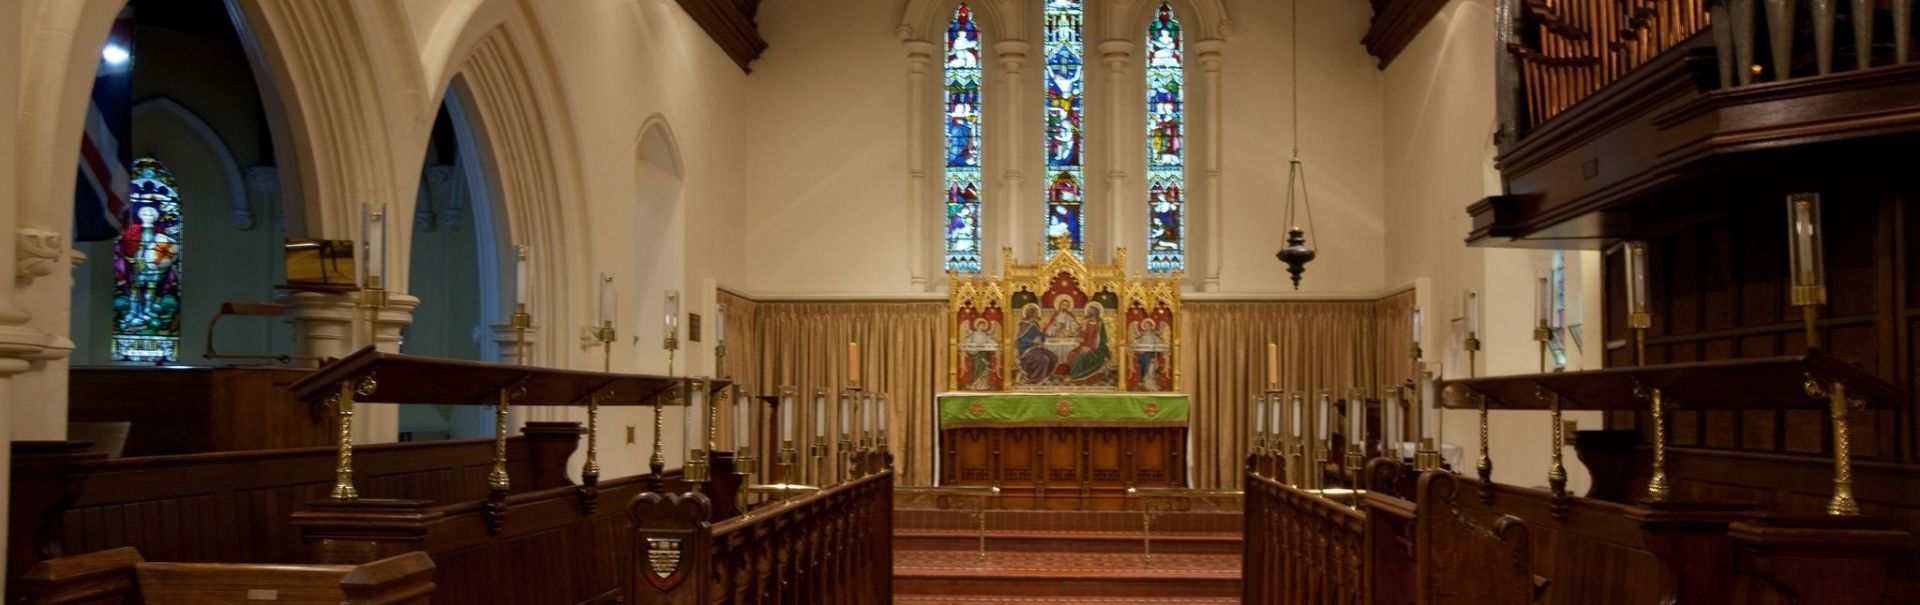 Altar and Choral Pews of St George's Anglican Church